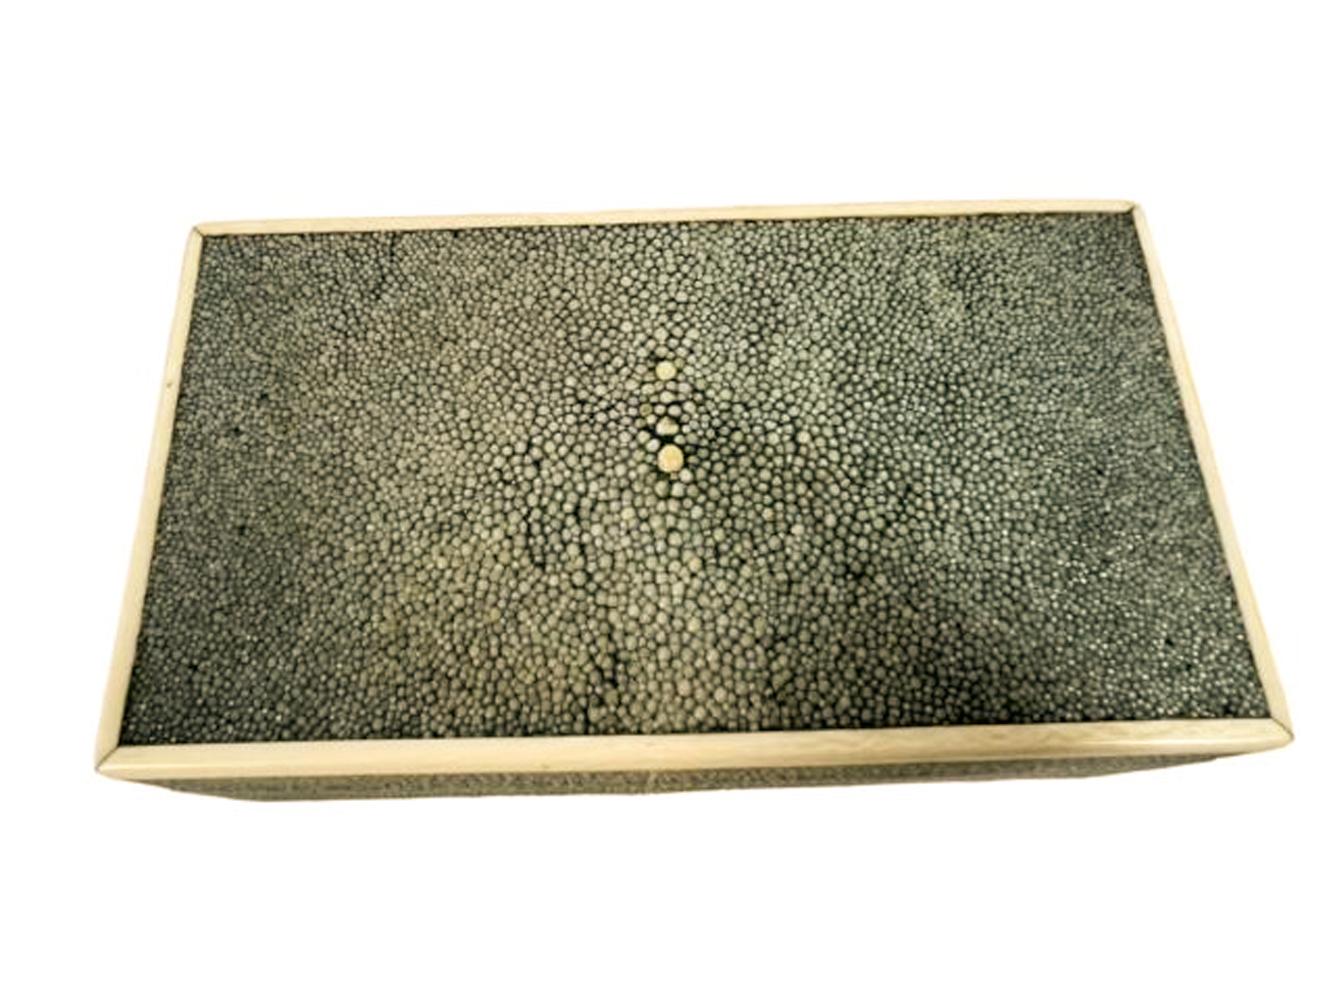 Art Deco shagreen covered box with hinged lid and bone edges. The lid closes snugly, and the interior is clean, the bottom retains its original baize cover.